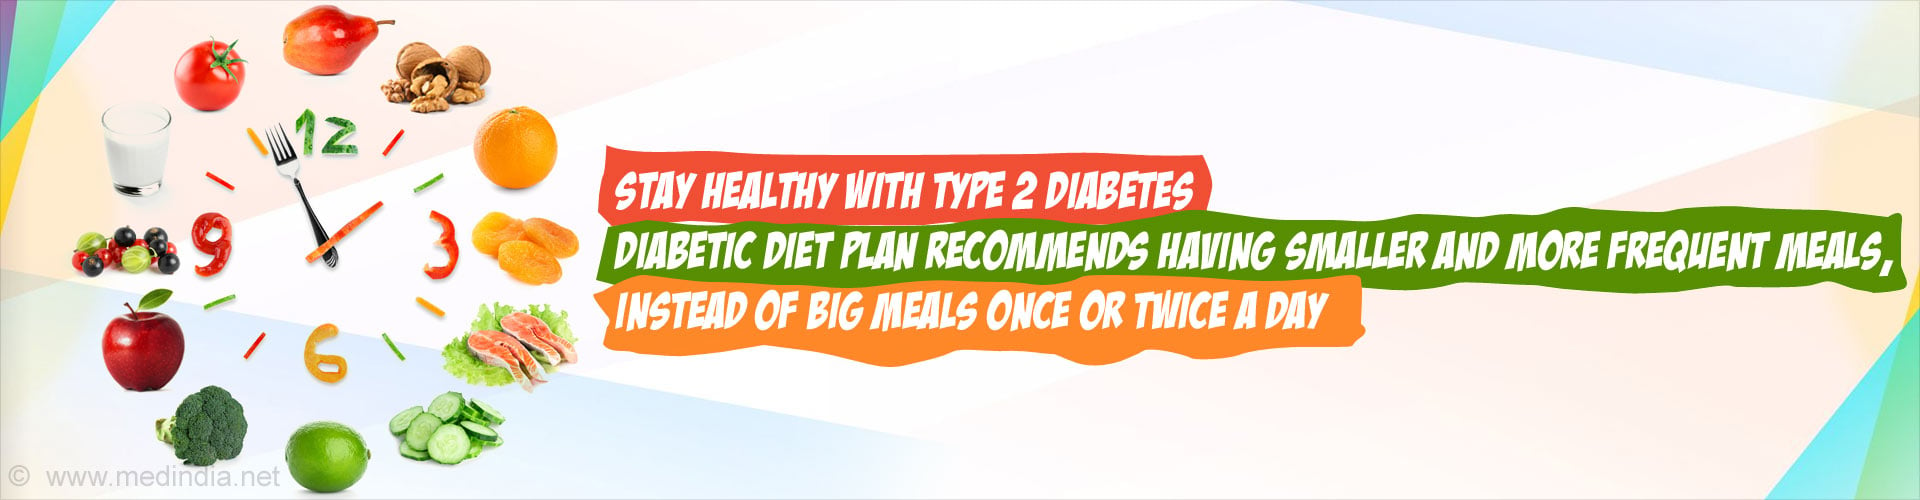 Stay Healthy With Type 2 Diabetes. Diabetic diet plan recommends having smaller and more frequent meals, instead of big meals once or twice a day.